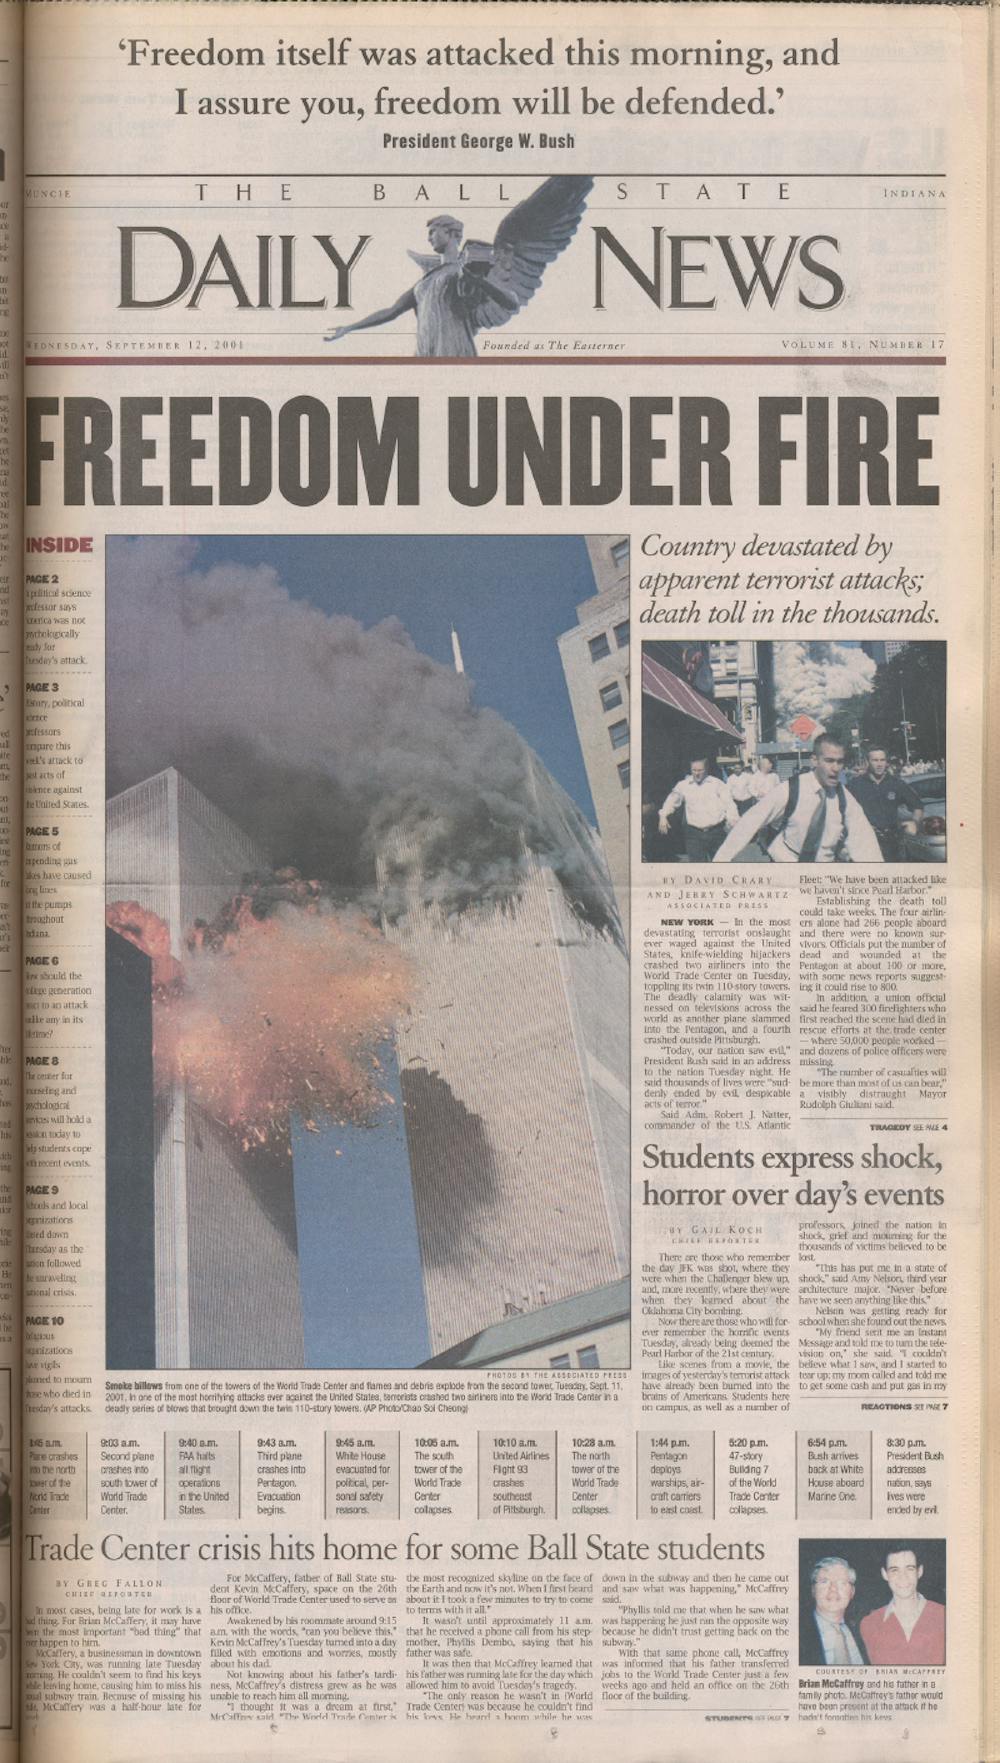 Former Daily News staff reflect on reporting the events of Sept. 11